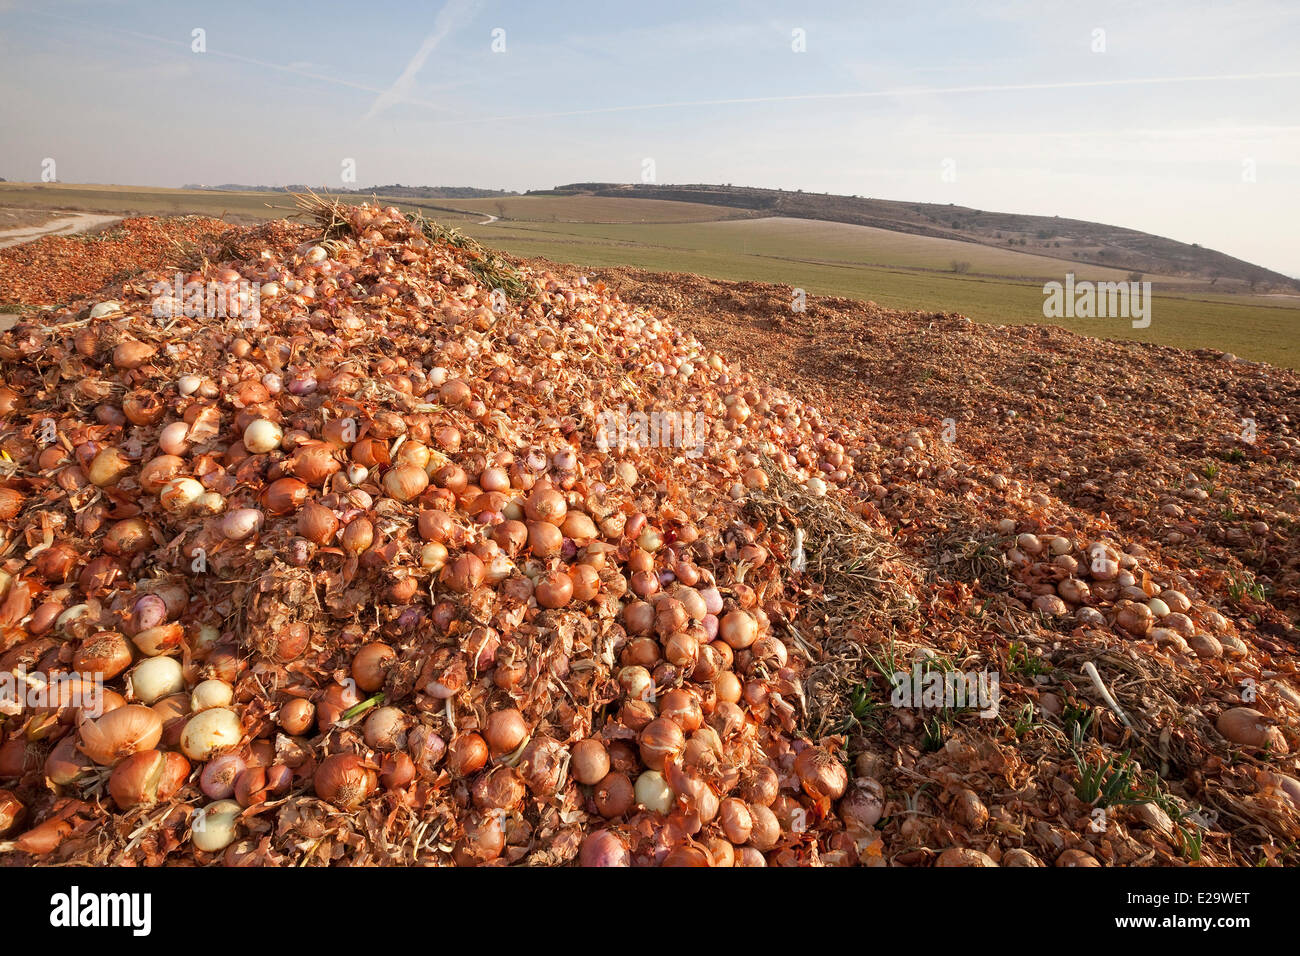 Spain, Catalonia, Lleida Province, Montsonis, deposit of onions in the nature Stock Photo